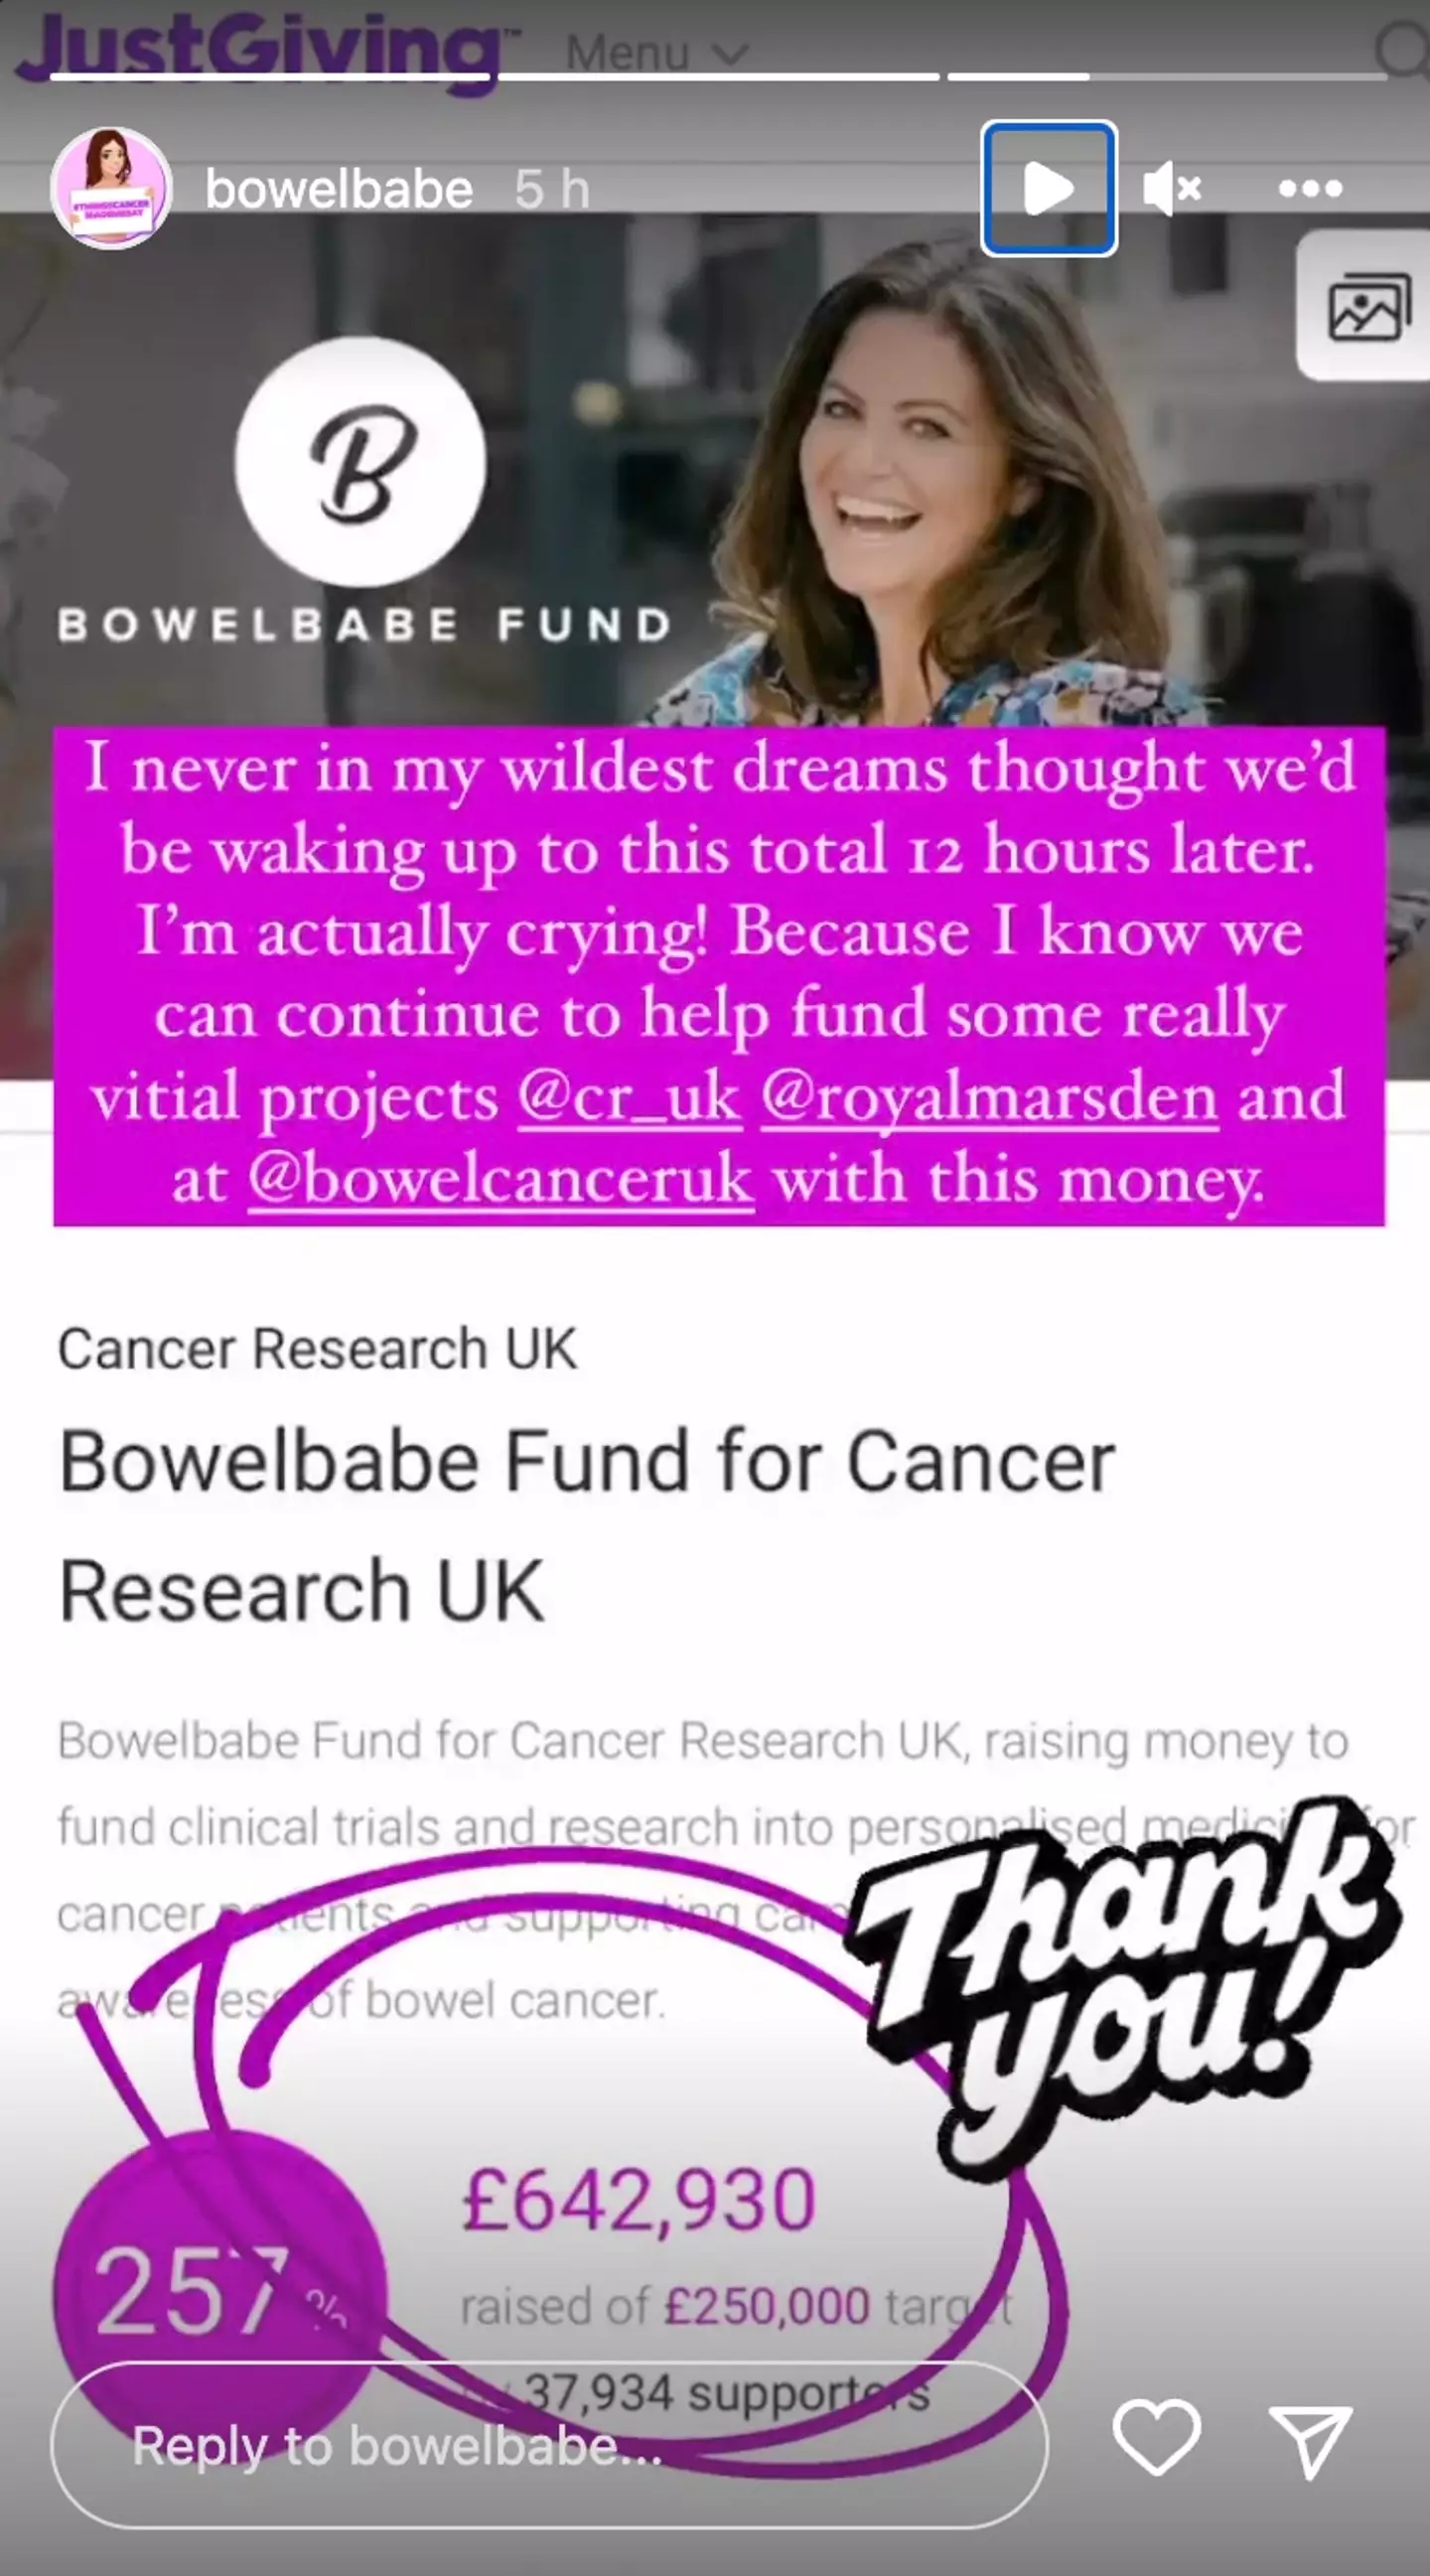 Her followers have helped to raise over £600K for her fund which will be donated to Cancer Research UK.